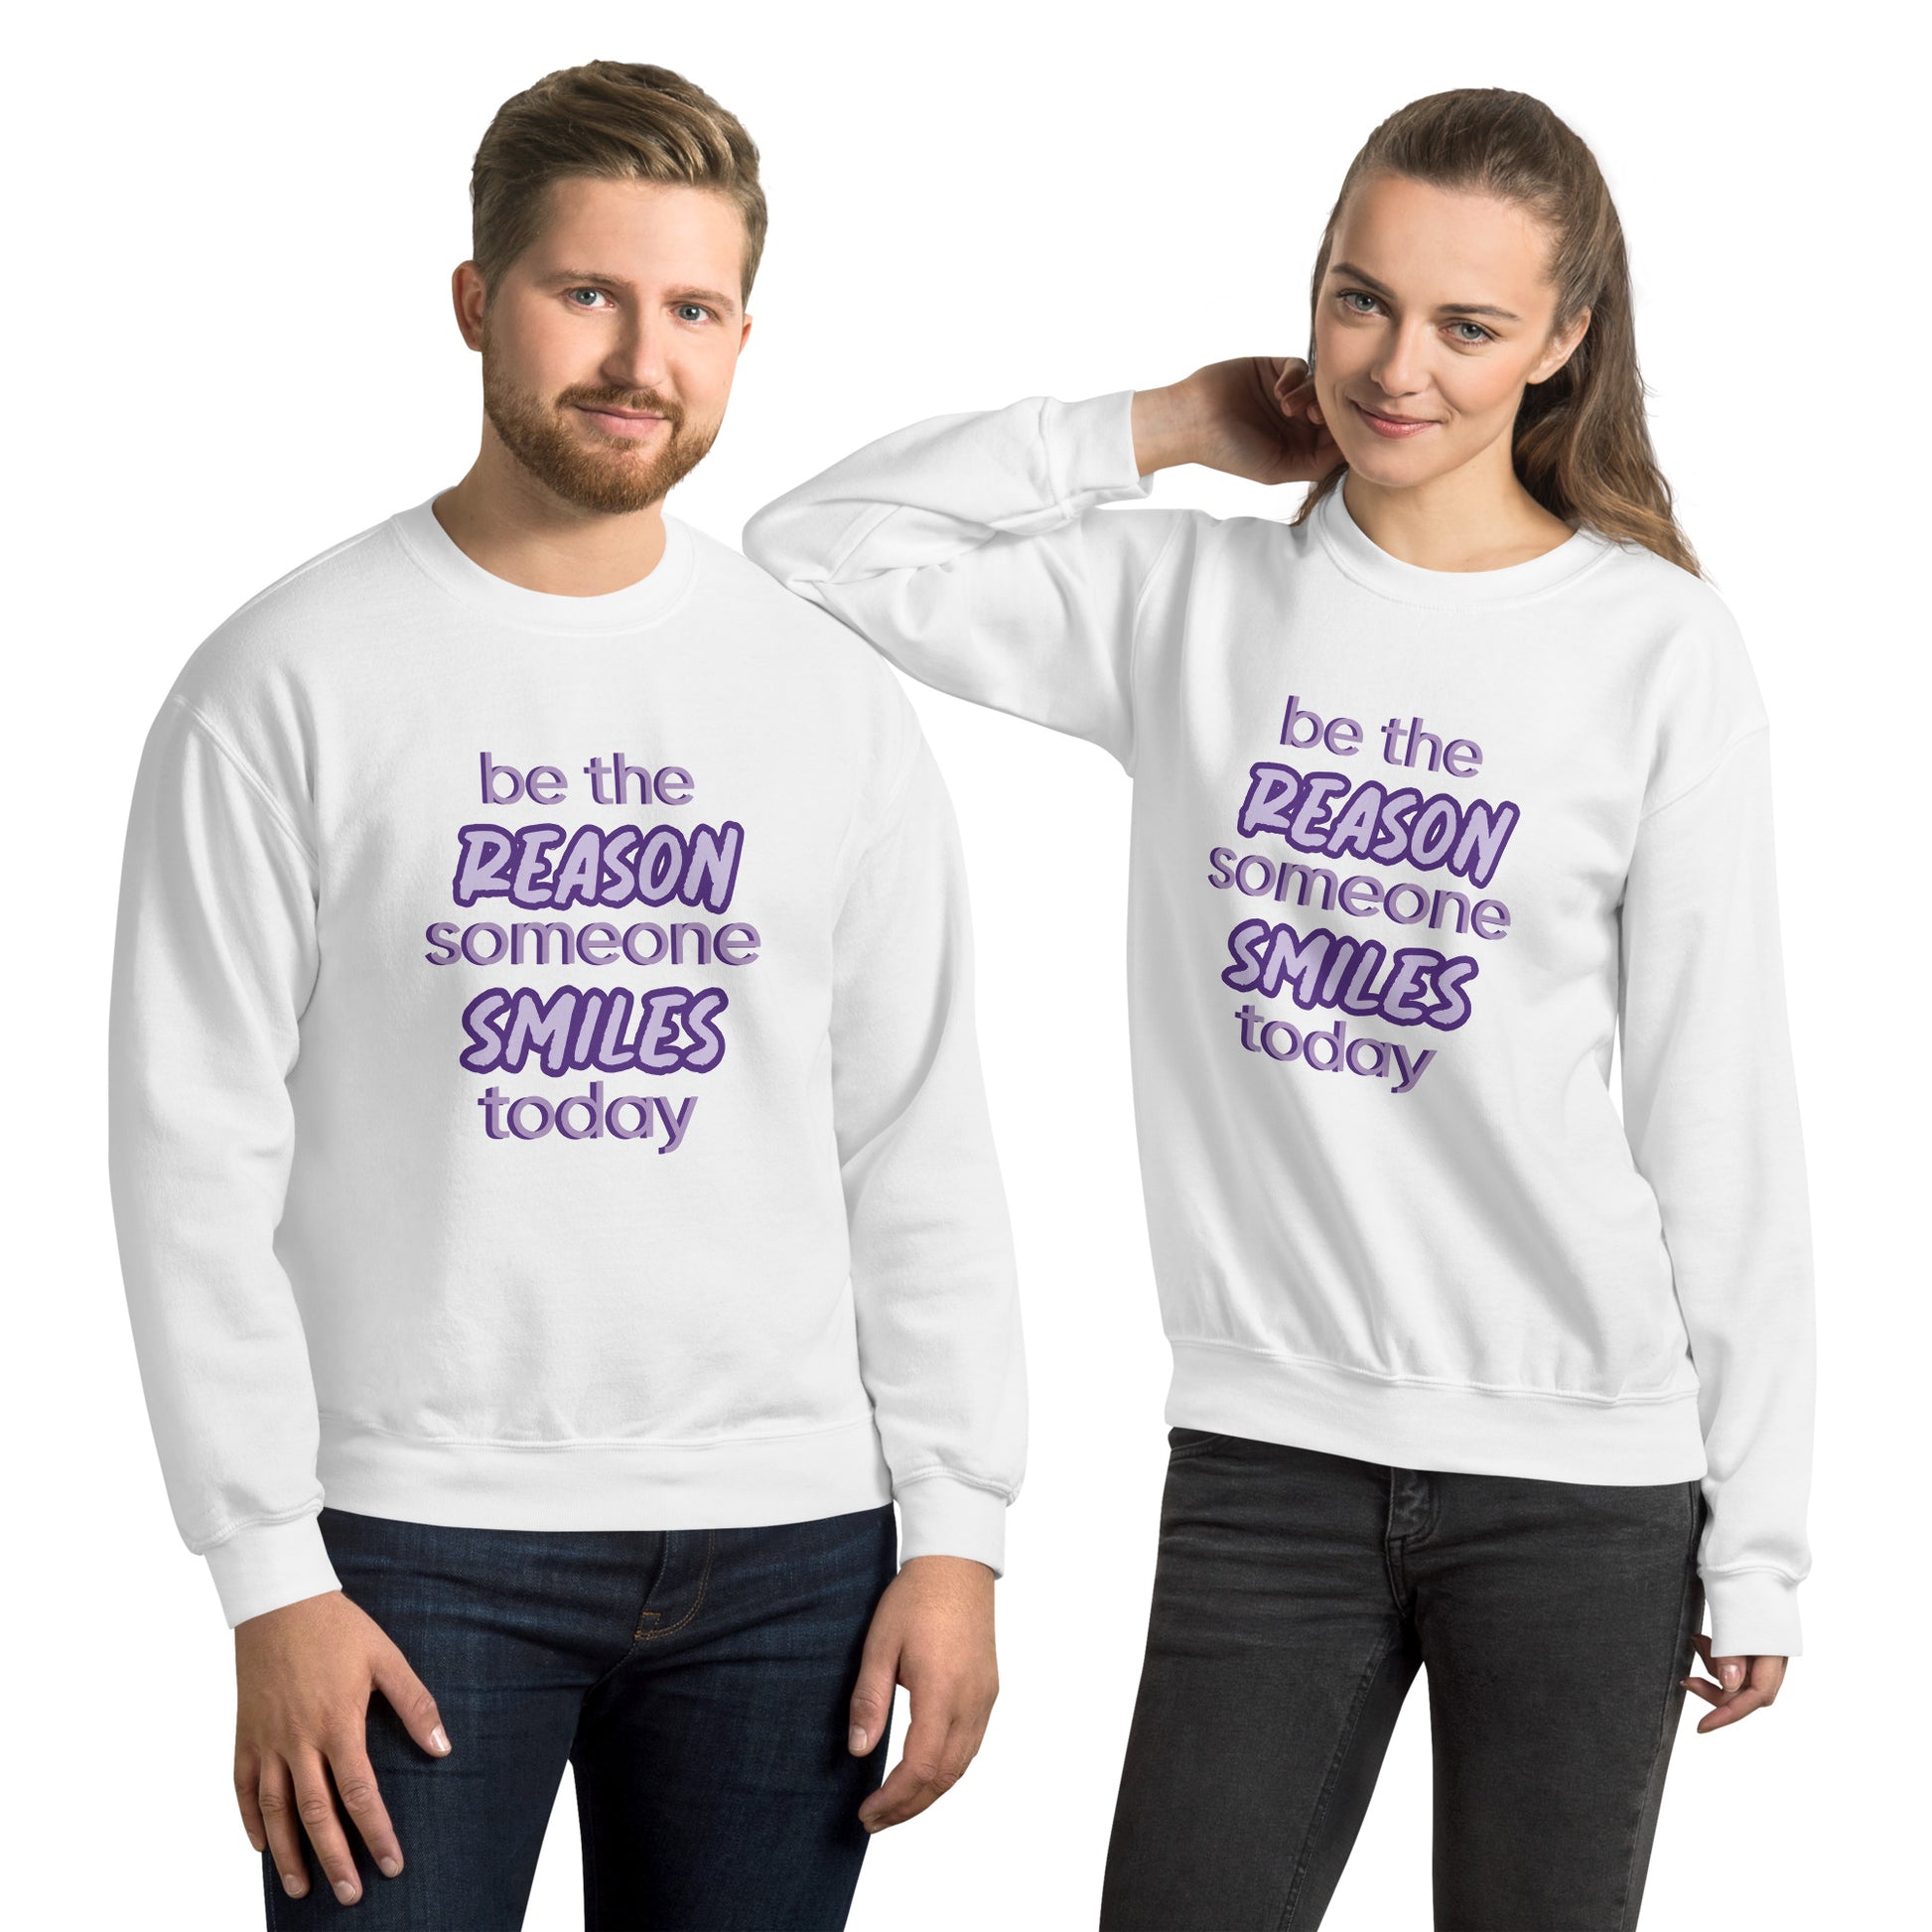 Men and women with white sweater and the quote "be the reason someone smiles today" in purple on it. 